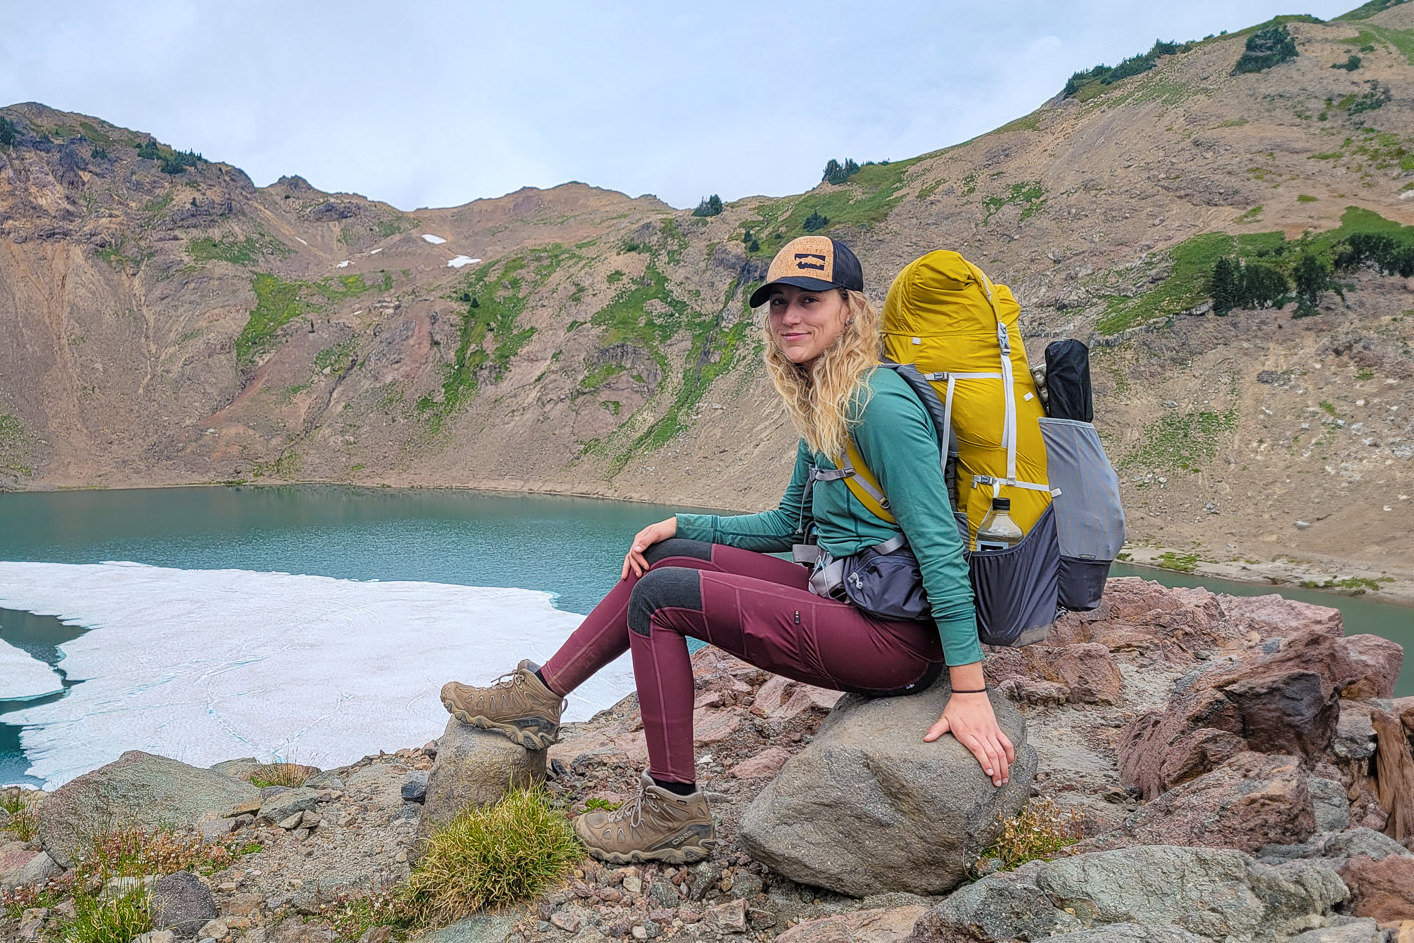 Best leggings for hiking? I have basically destroyed my Aligns by hiking in  them so I was wondering what your favorites are! (wearing the aligns in  black in the picture-- not the